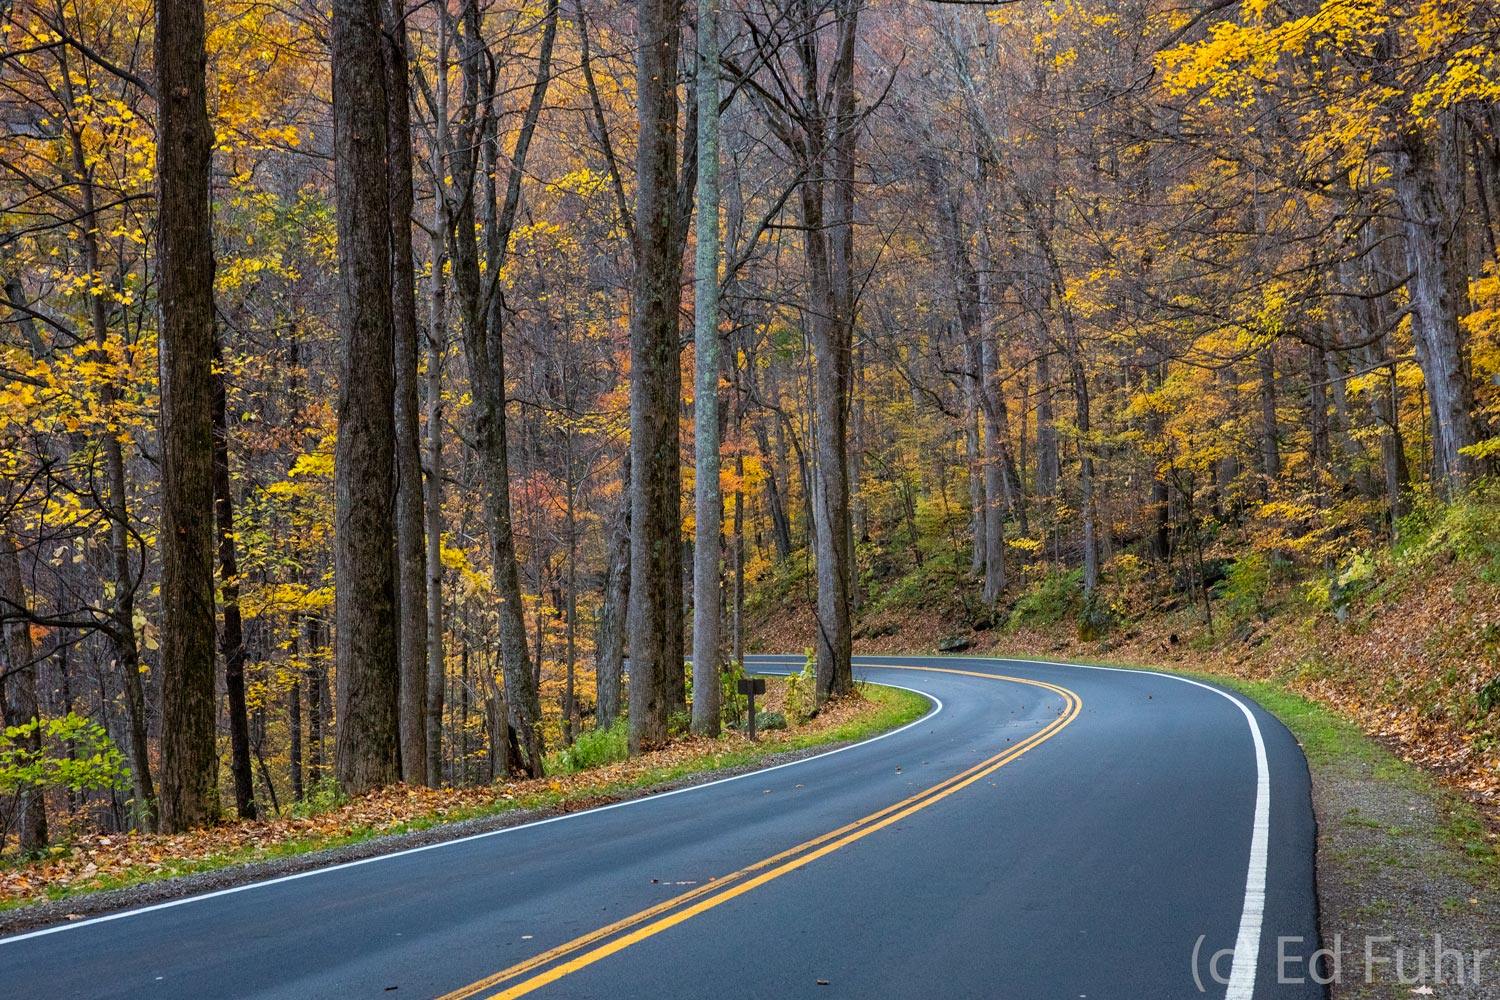 A peaceful autumn drive along the road to Newfound Gap, near the highest point of the Great Smoky Mountains.